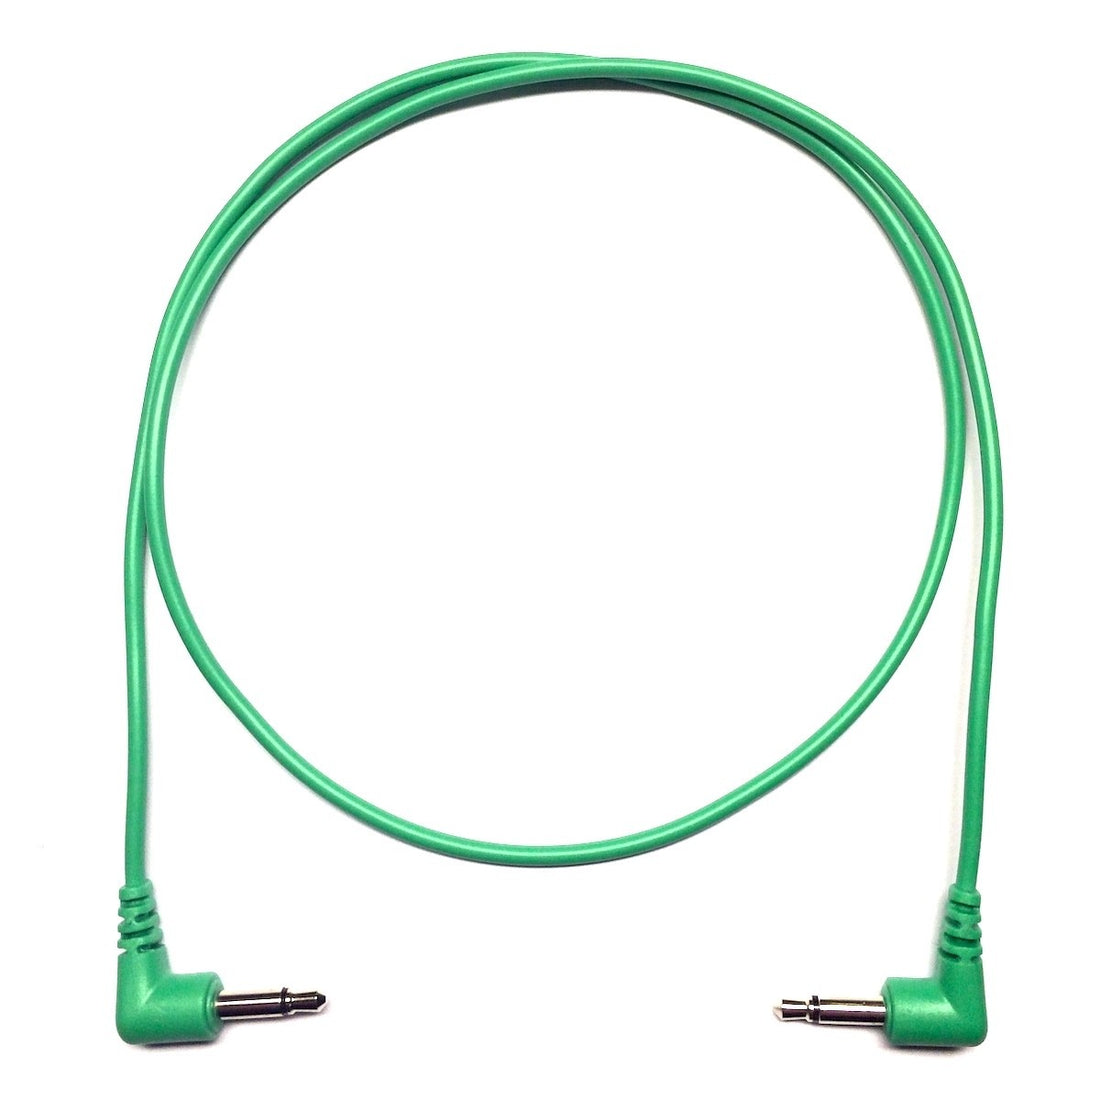 Patch Cable - Emerald 60cm (6 Pack)